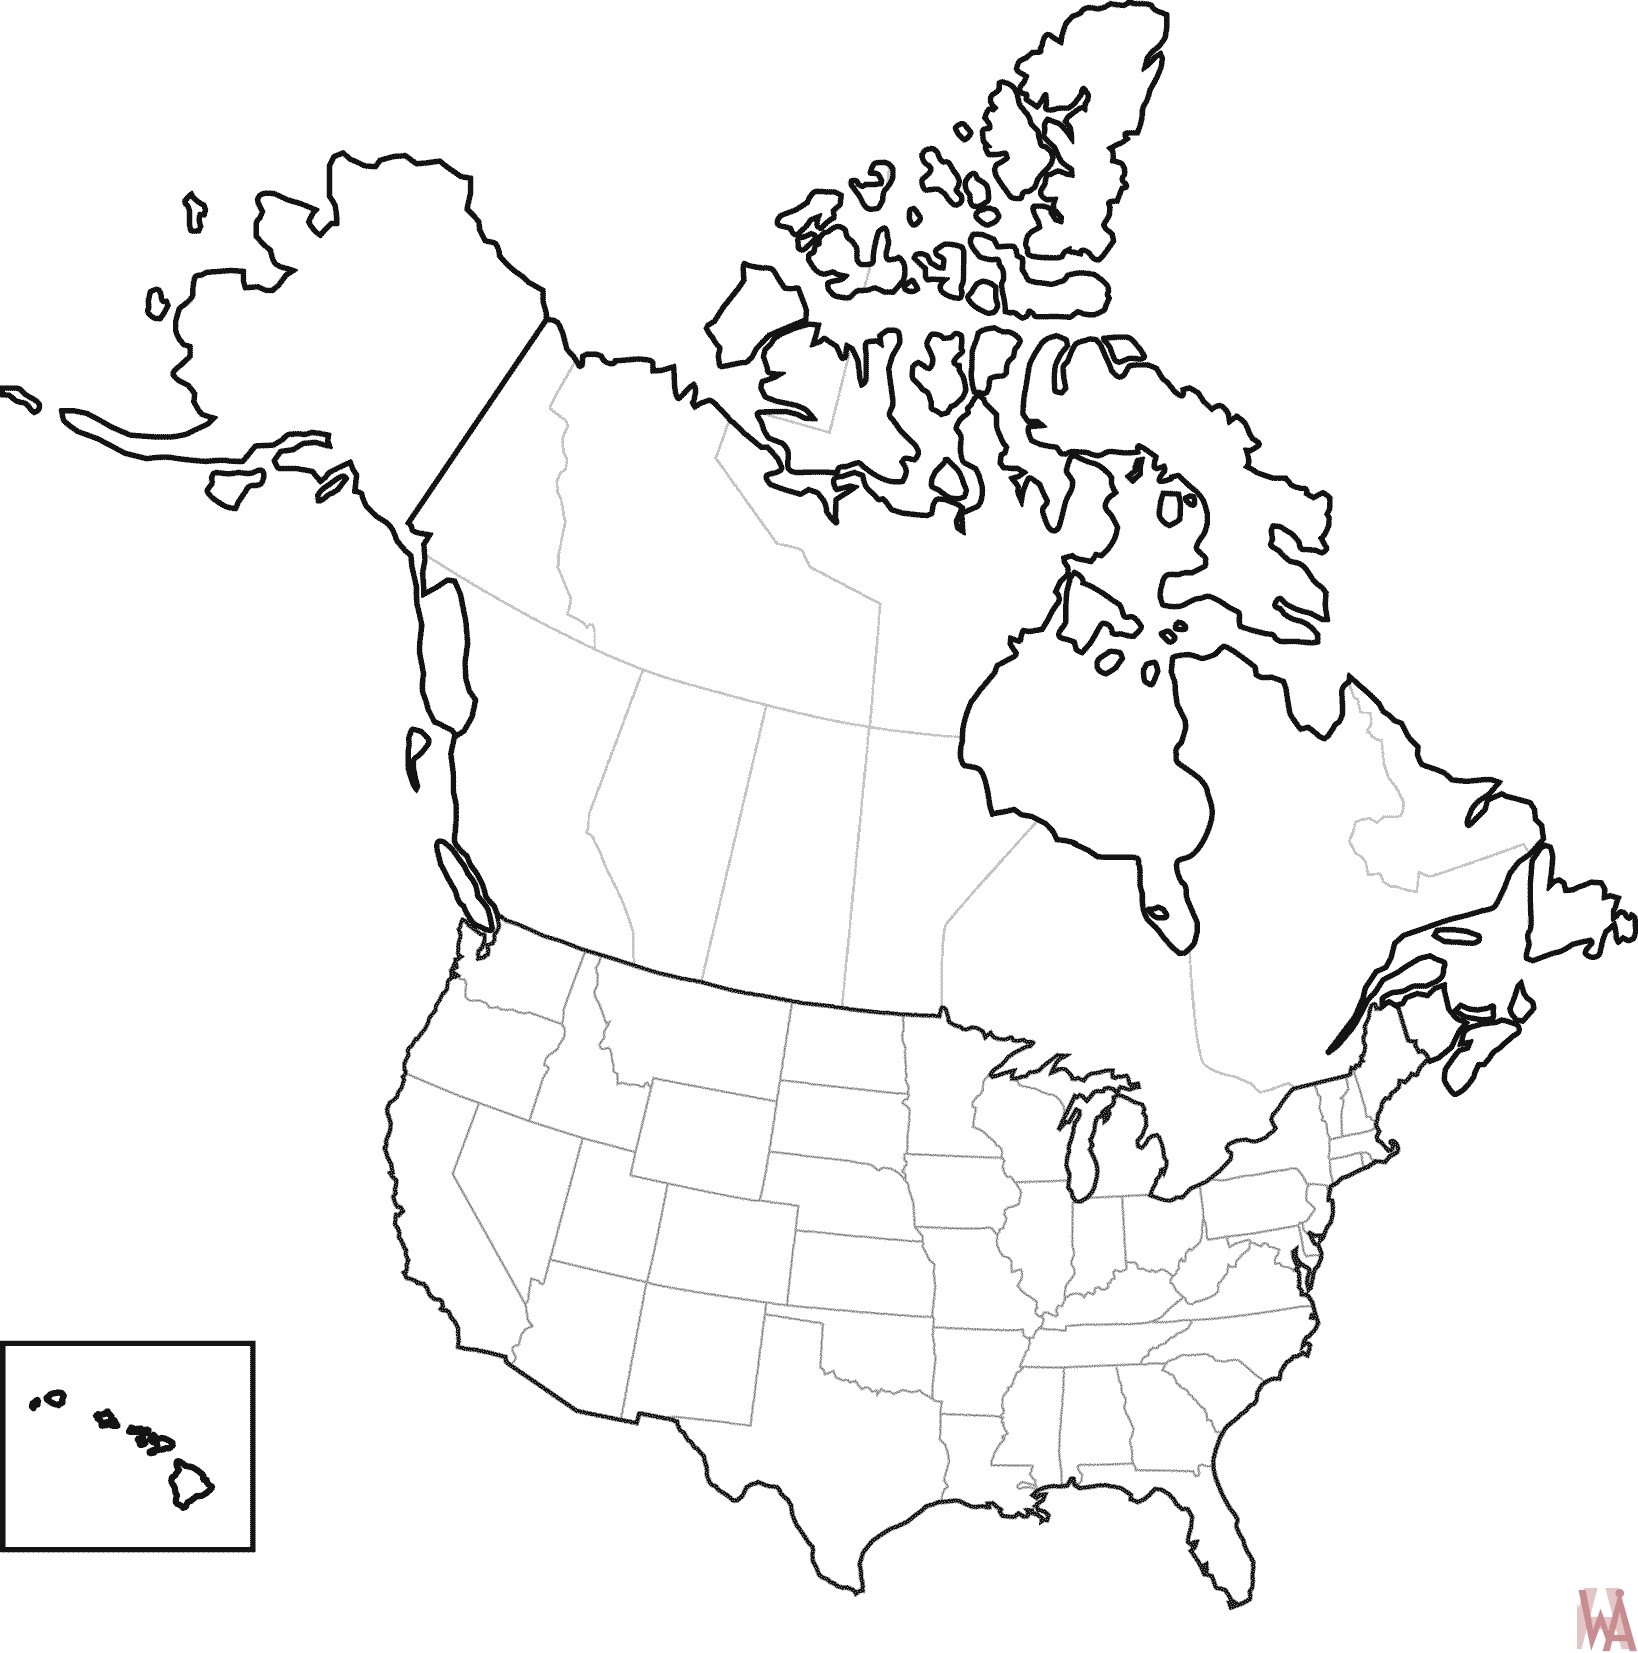 Blank Us Canada Map Blank Outline Map of the United States And Canada | WhatsAnswer